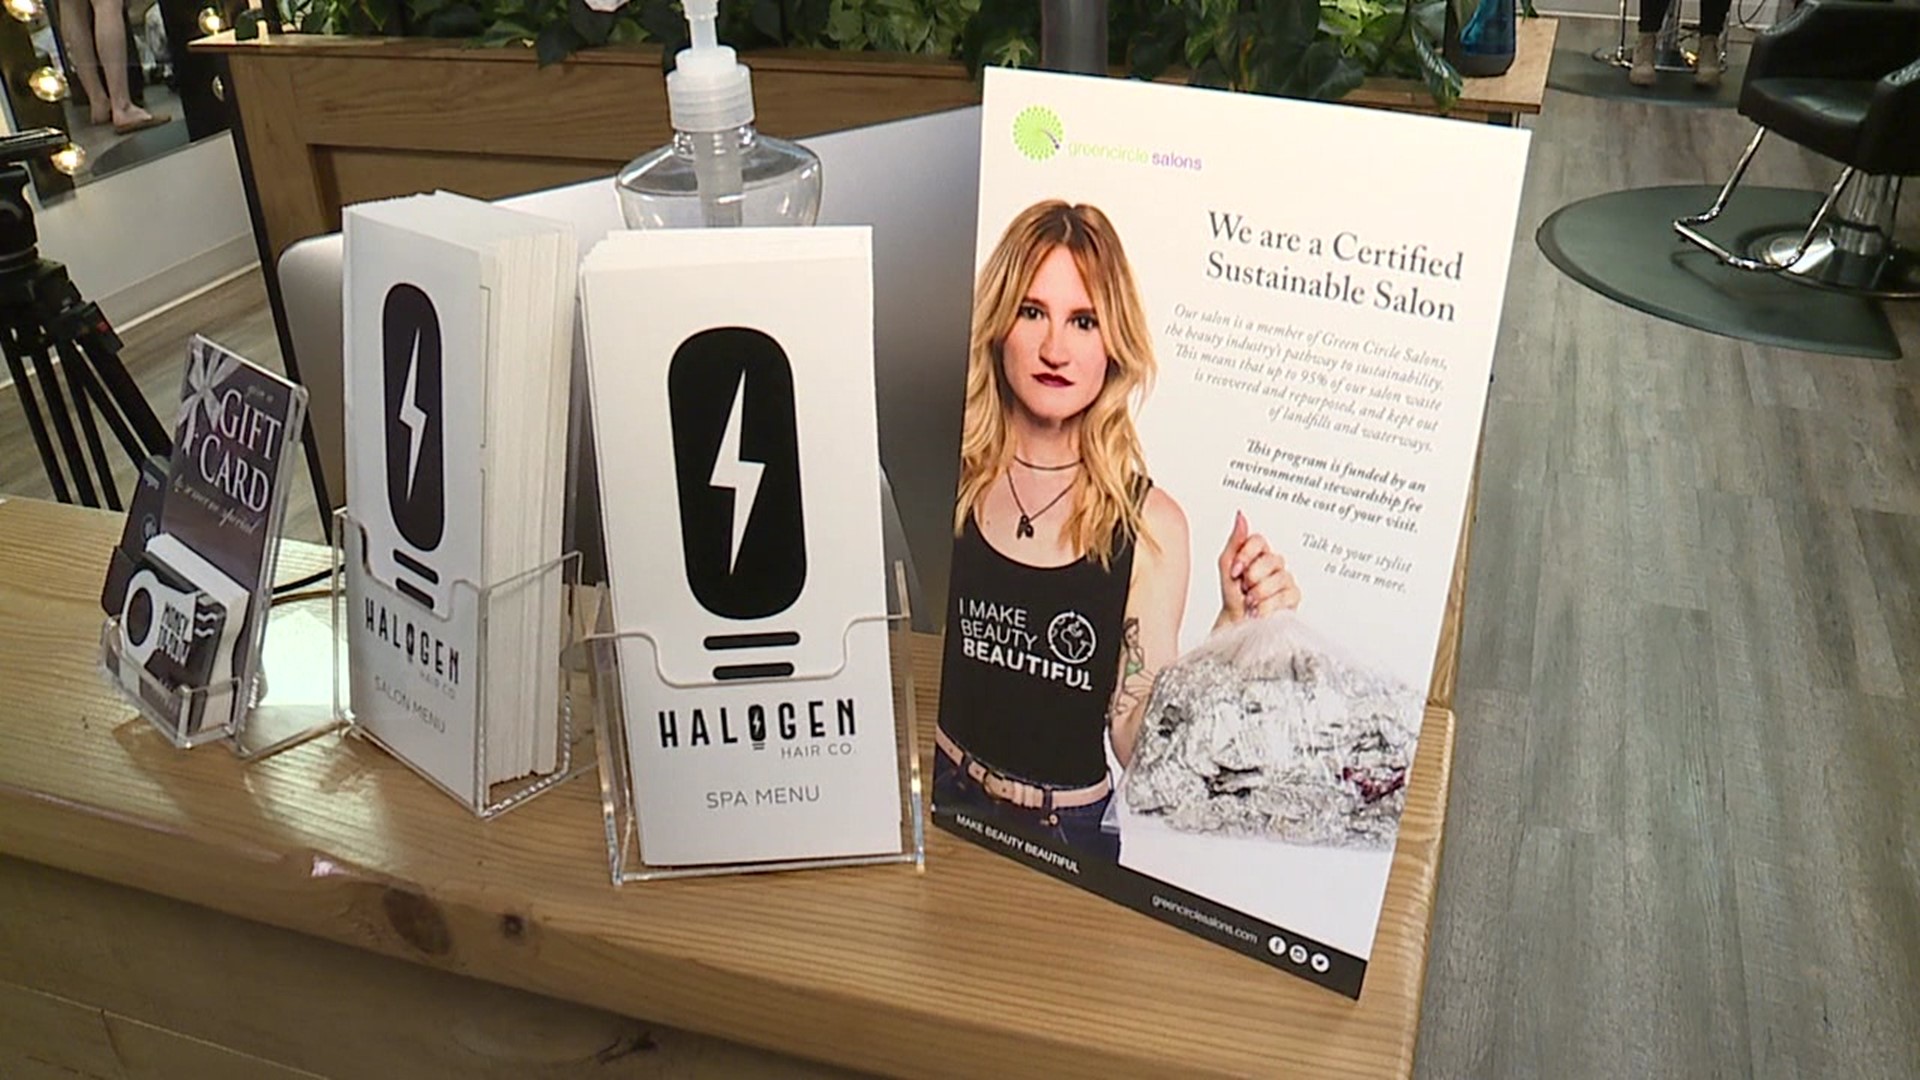 No waste, no problem. That's the new motto for Halogen Hair Company in Hazle Township.